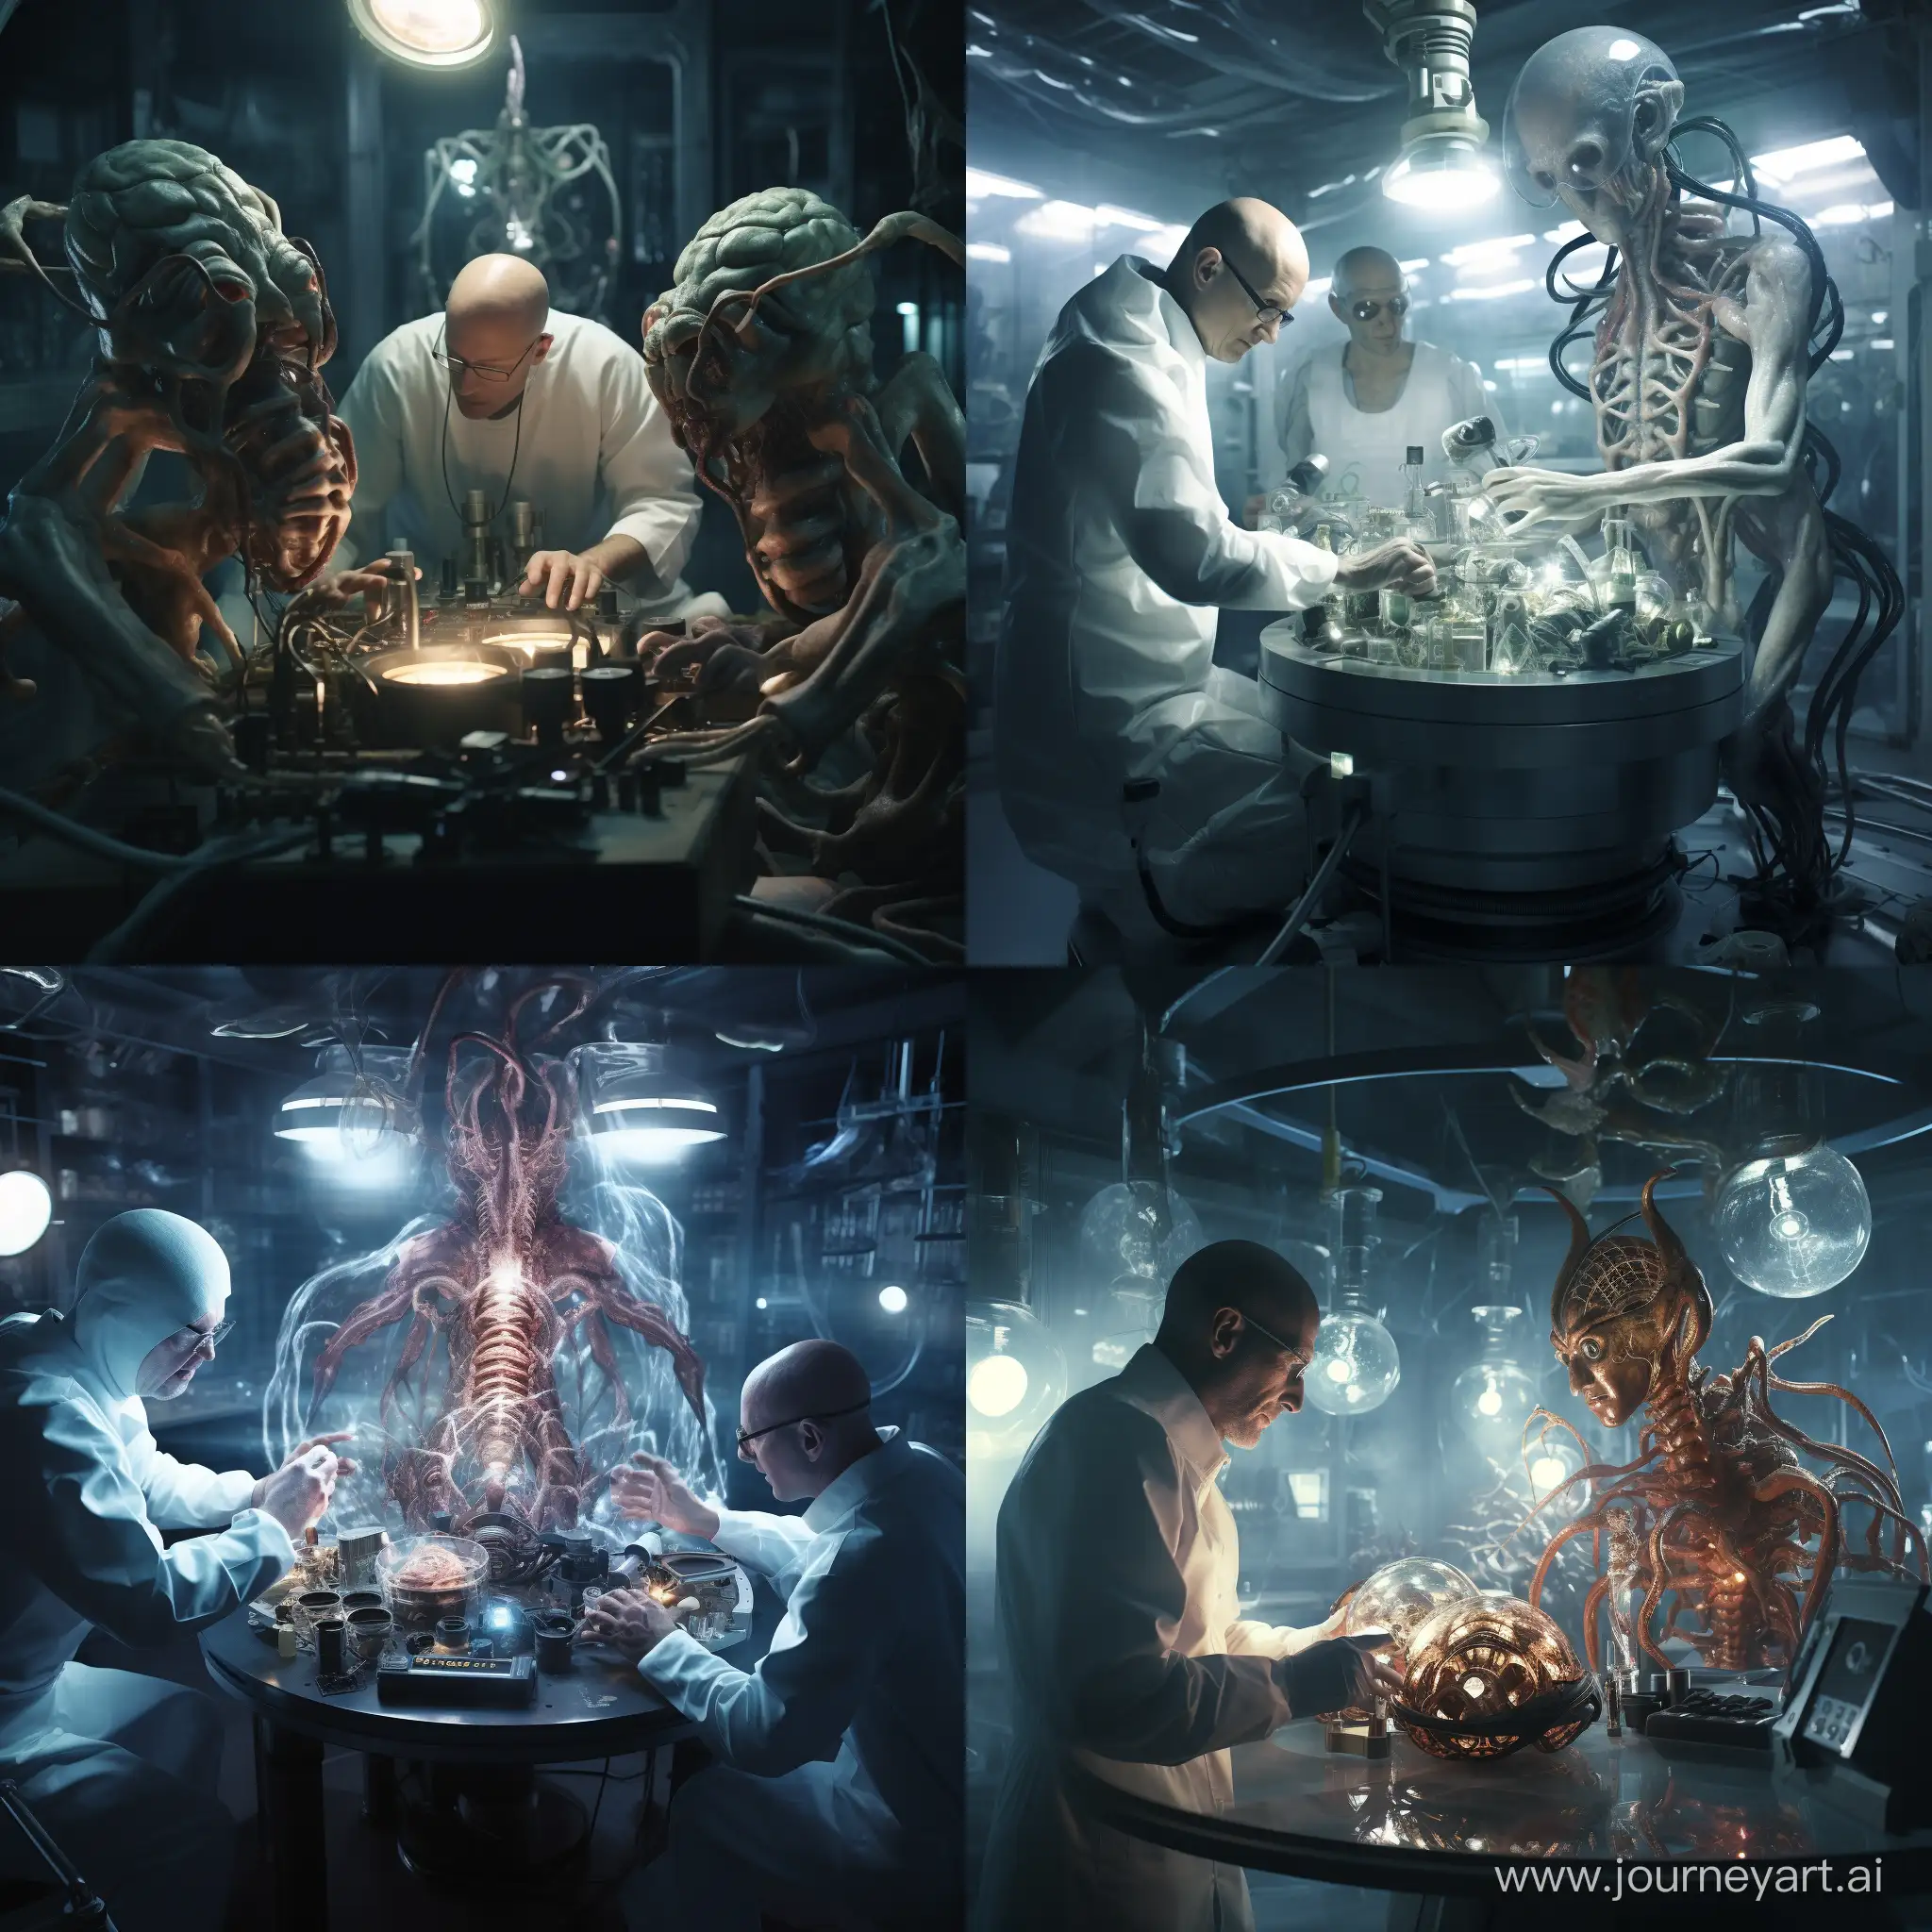 Extraterrestrial-Alien-Scientists-Conducting-Cinematic-Human-Dissection-in-Lab